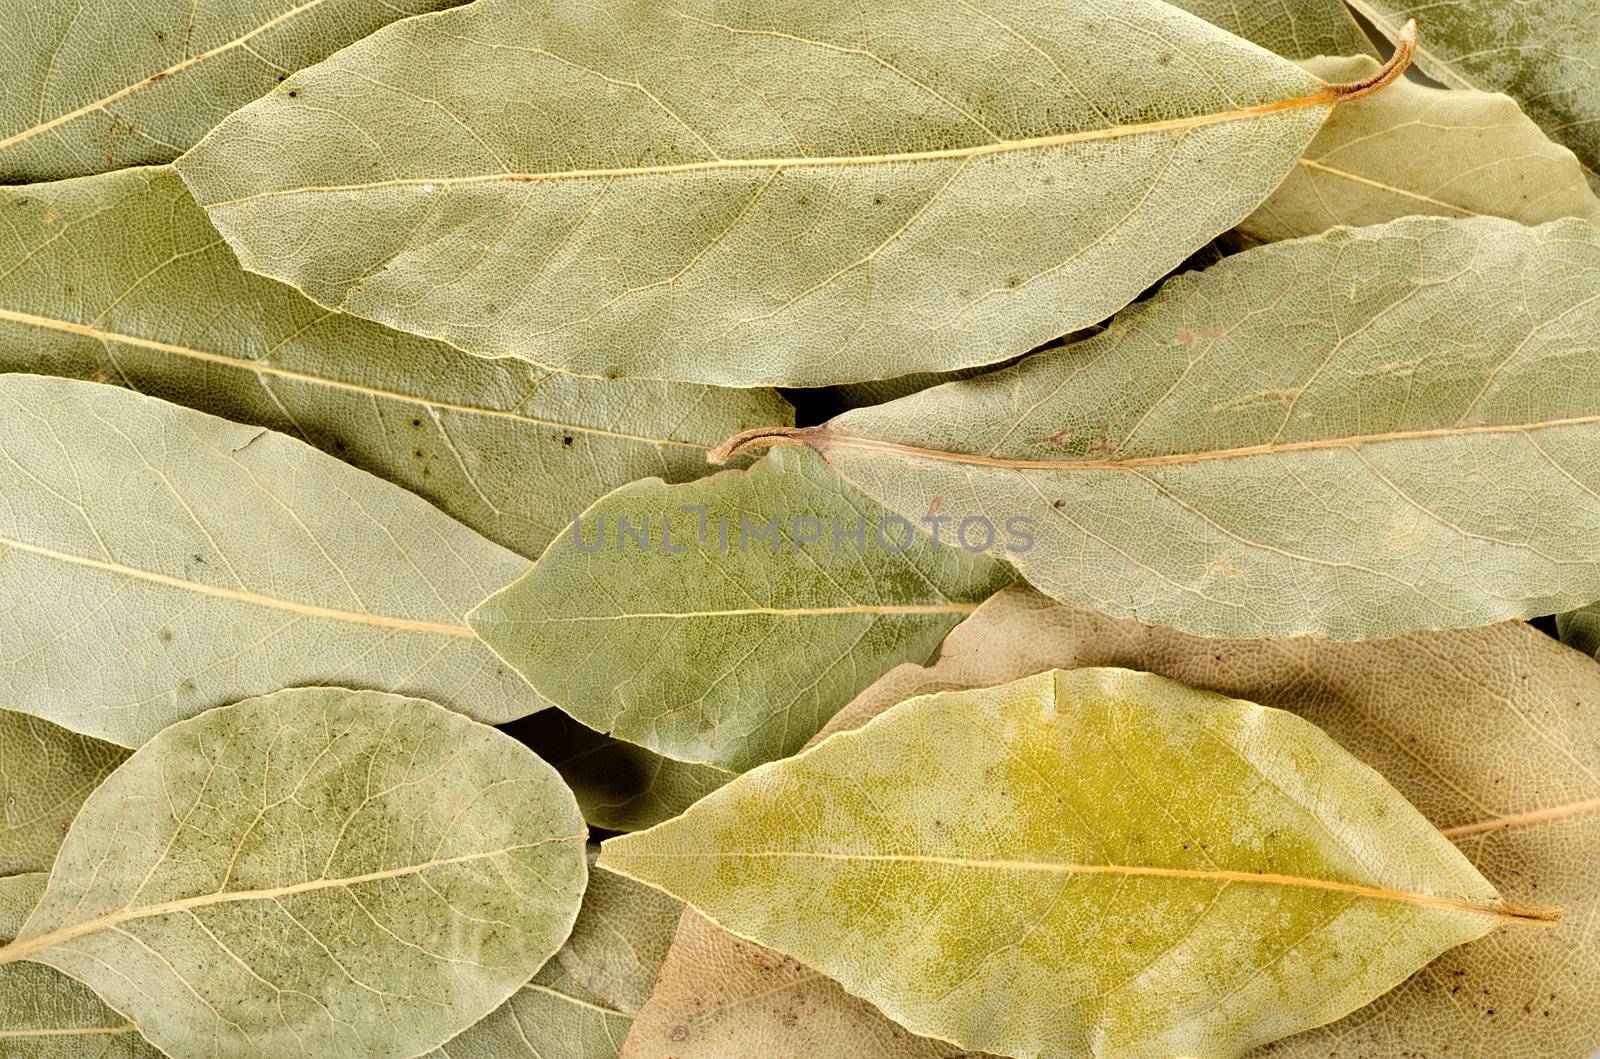 Arrangement of bay leaves by Givaga